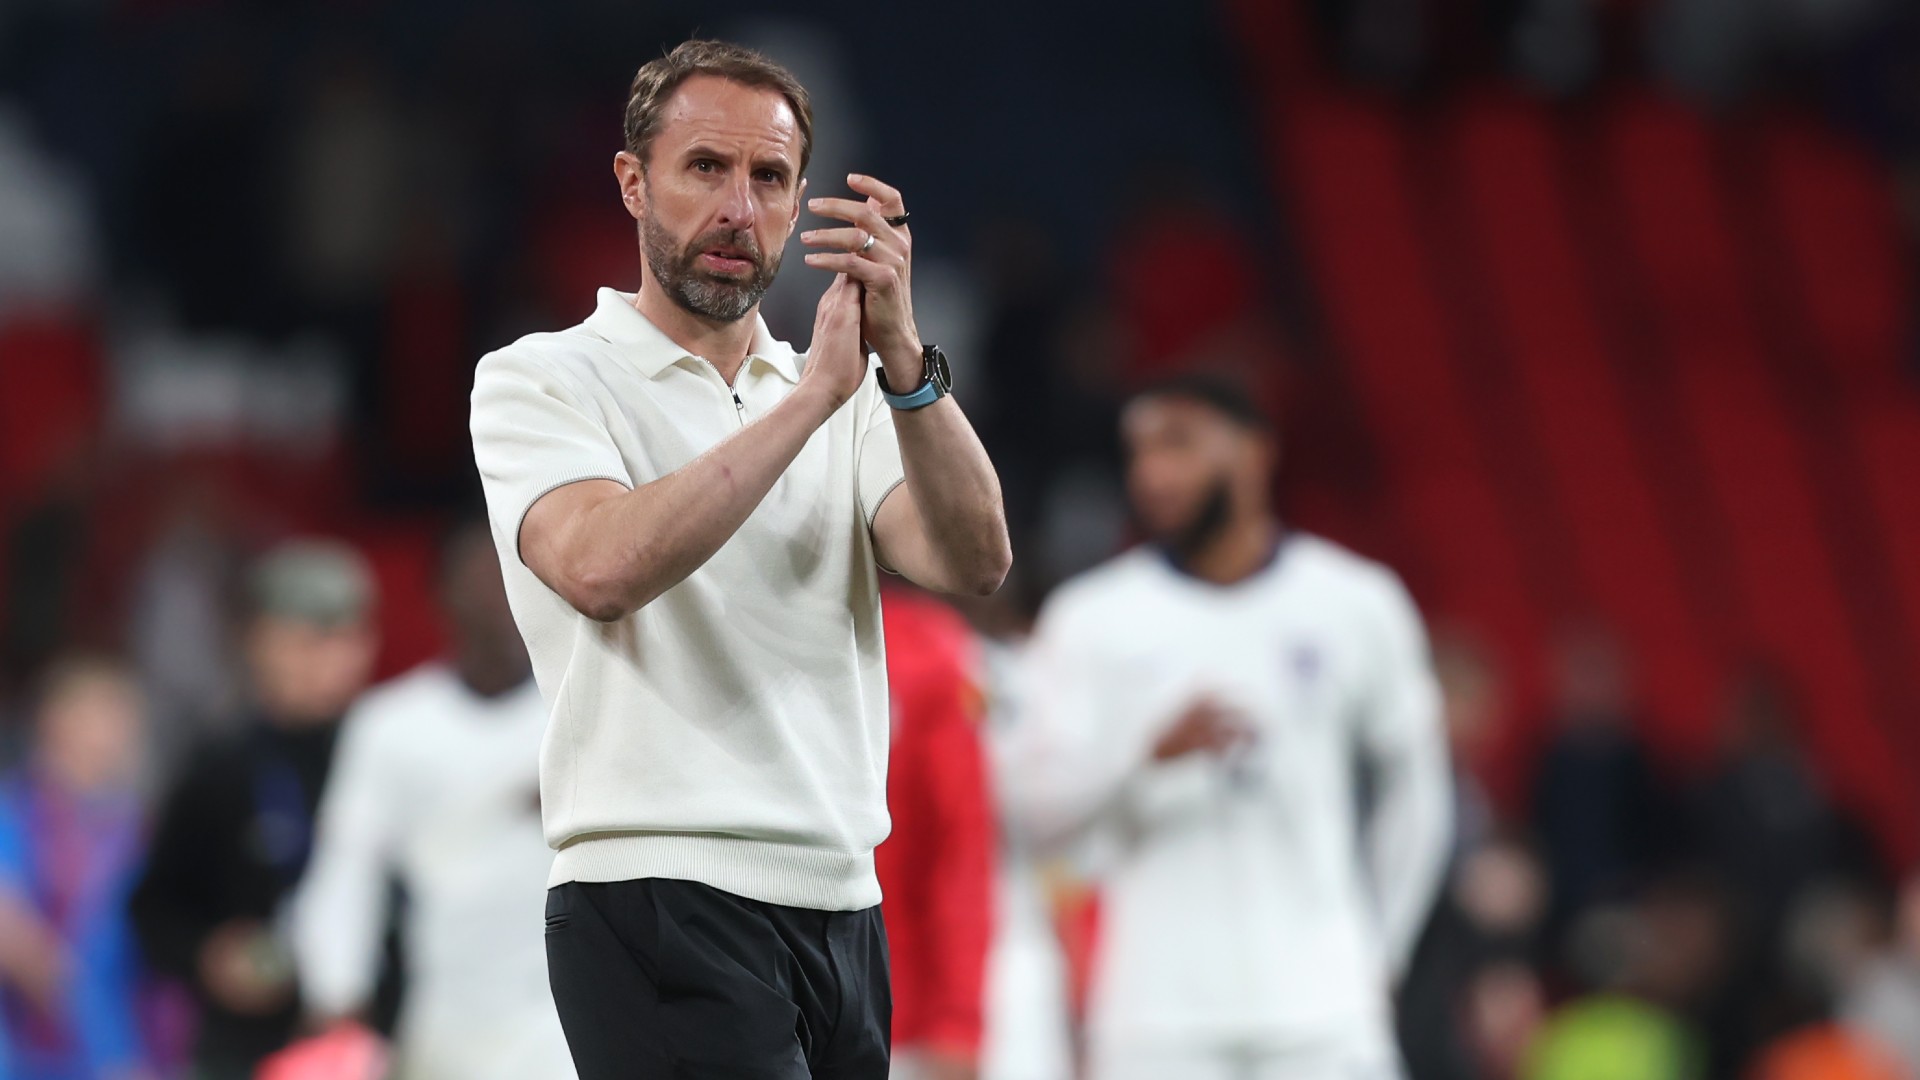 Euro 2024 last chance for Southgate